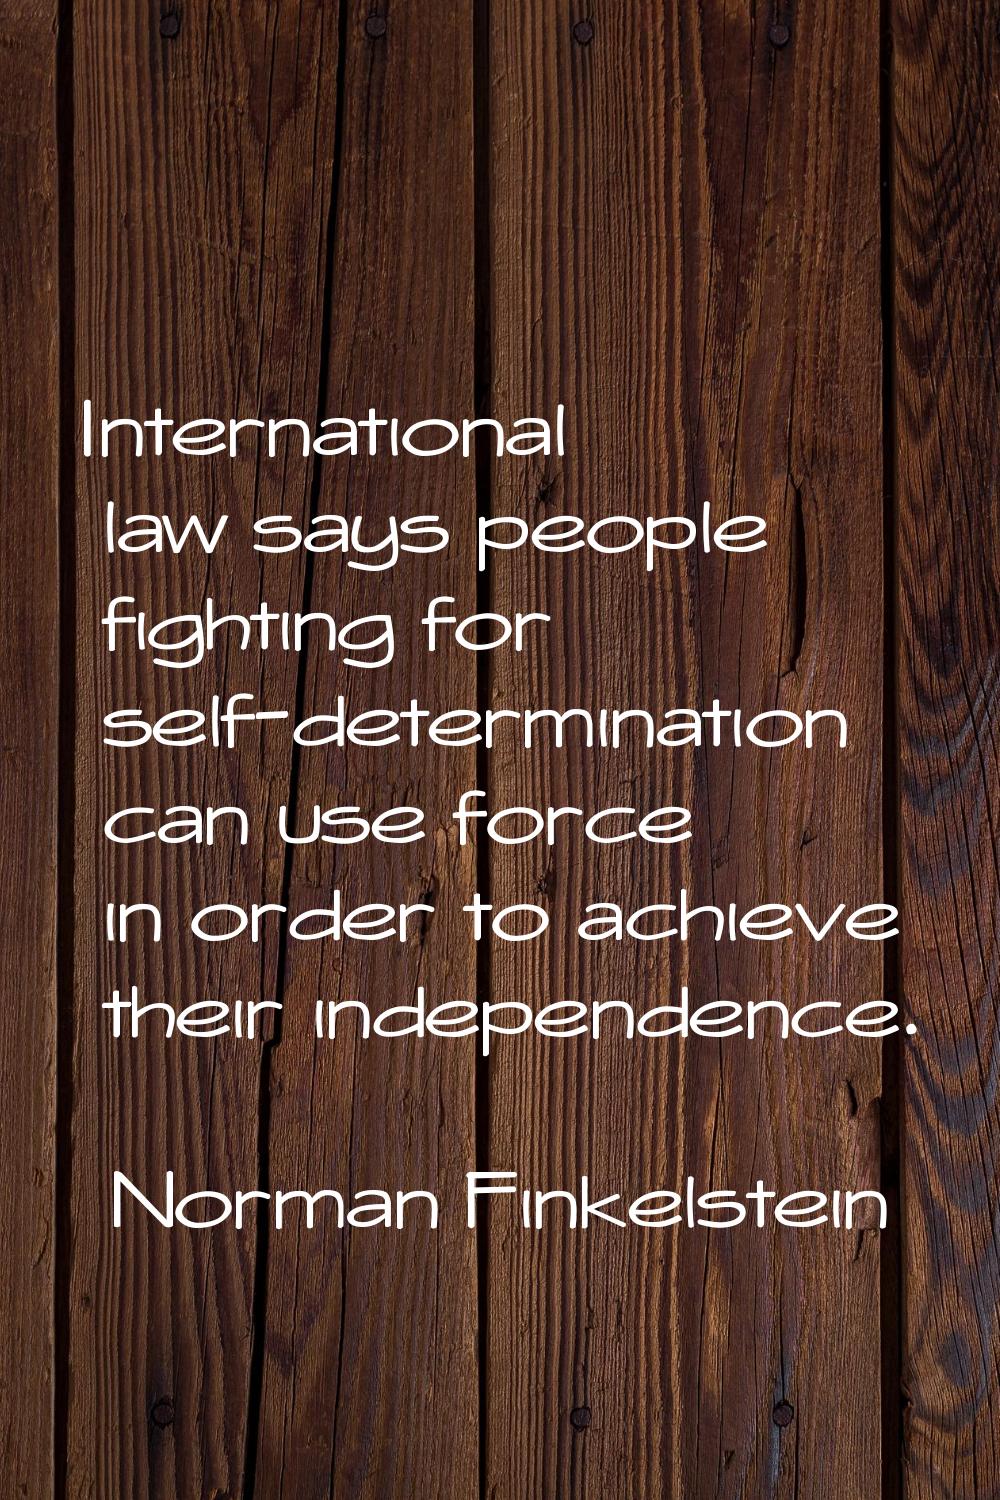 International law says people fighting for self-determination can use force in order to achieve the